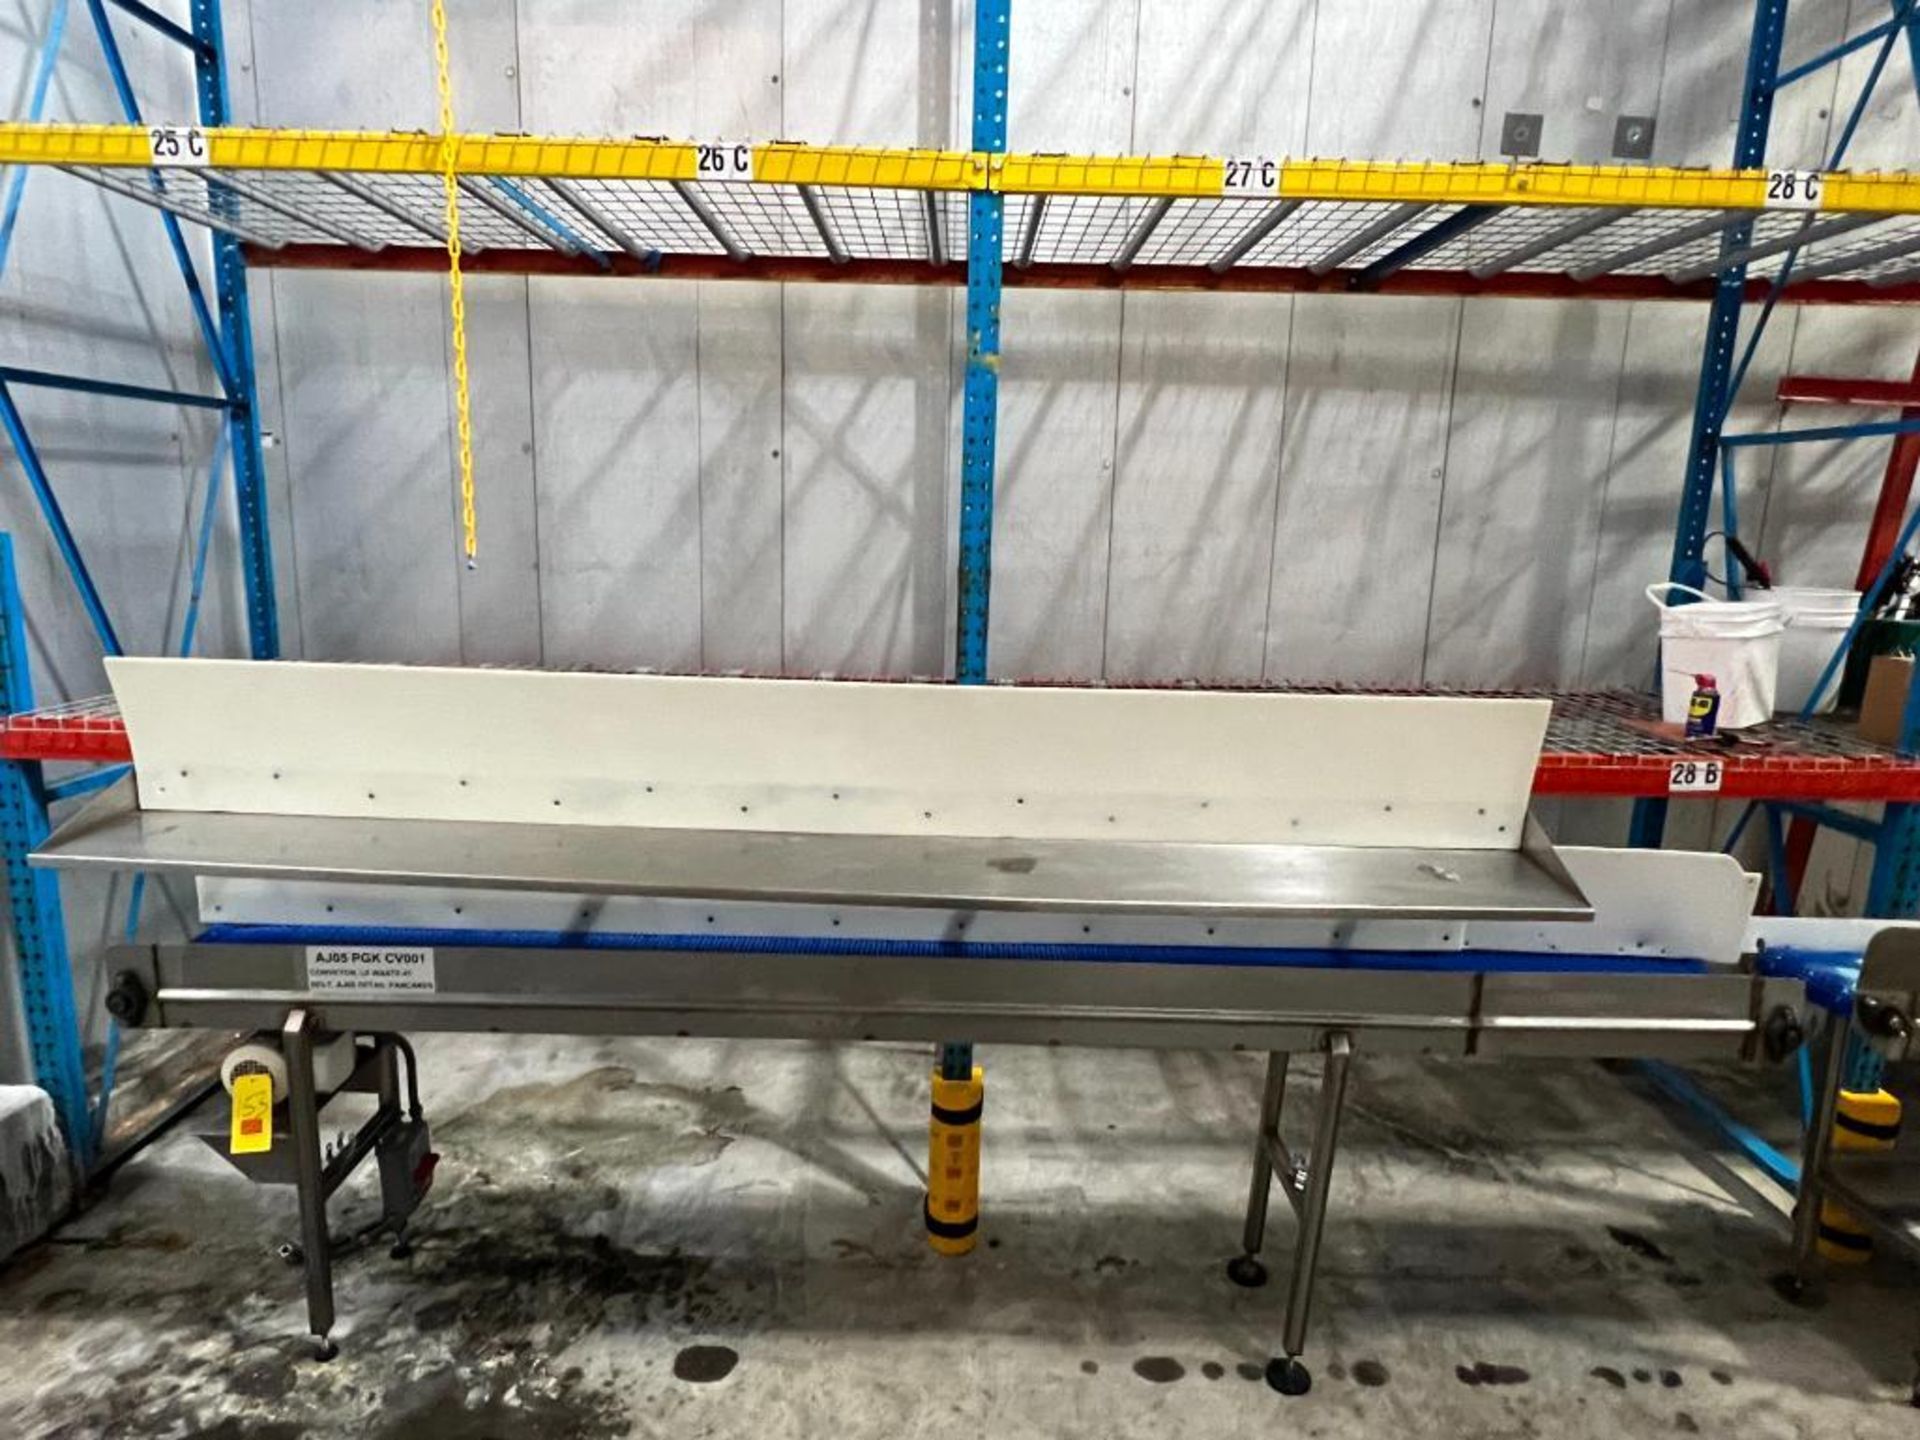 S/S Frame Product Conveyor with Upper Shelf, Dimensions = 142" Length x 12" Width - Rigging Fee: $15 - Image 2 of 2